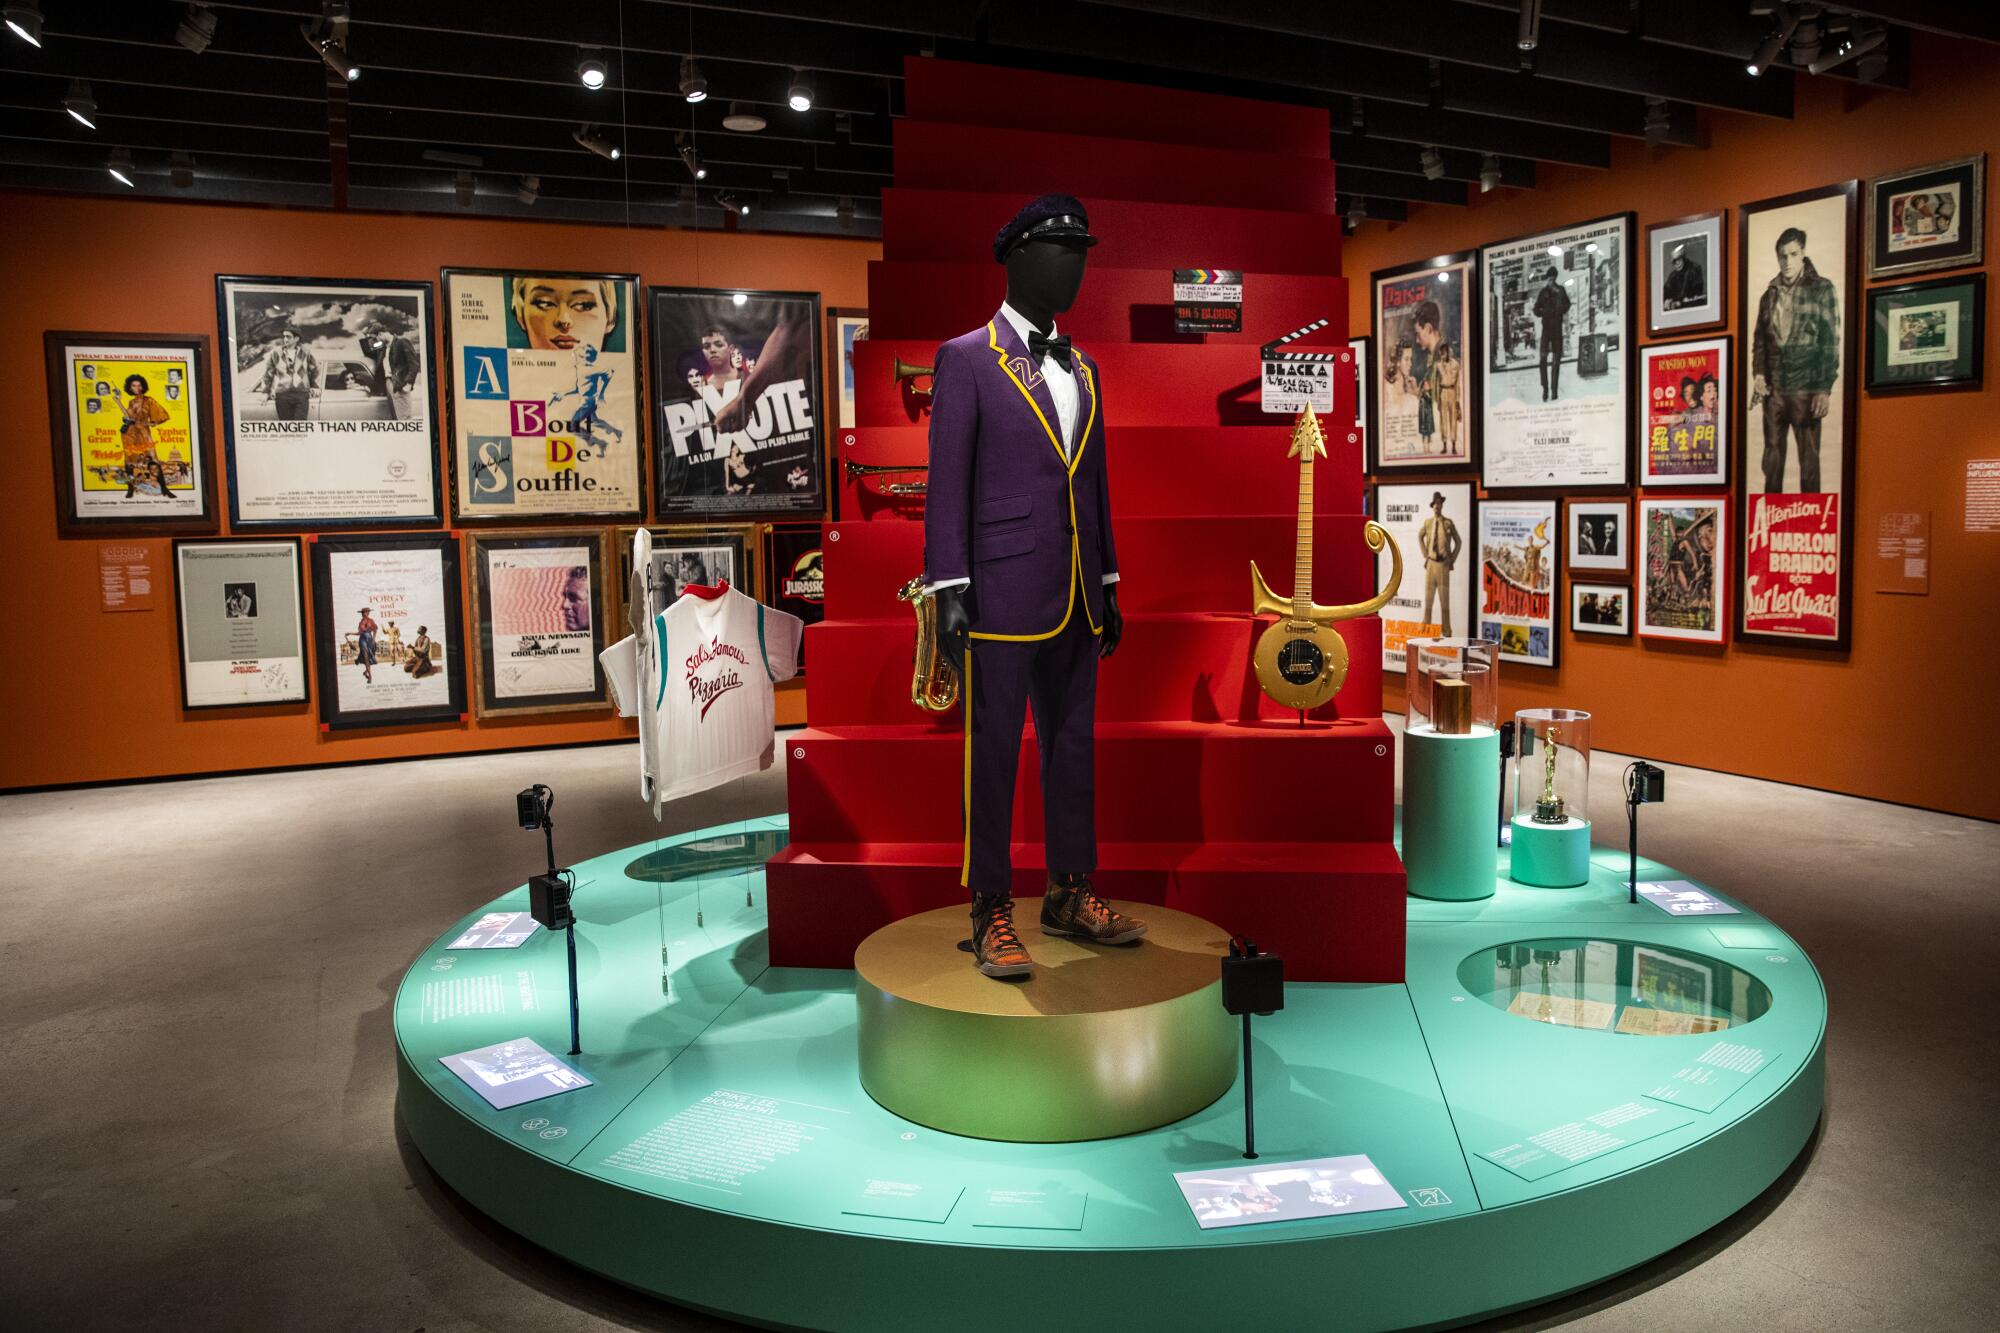 A platform houses a mannequin wearing a purple suit, a red staircase with a Prince guitar on it, a jersey and a statuette